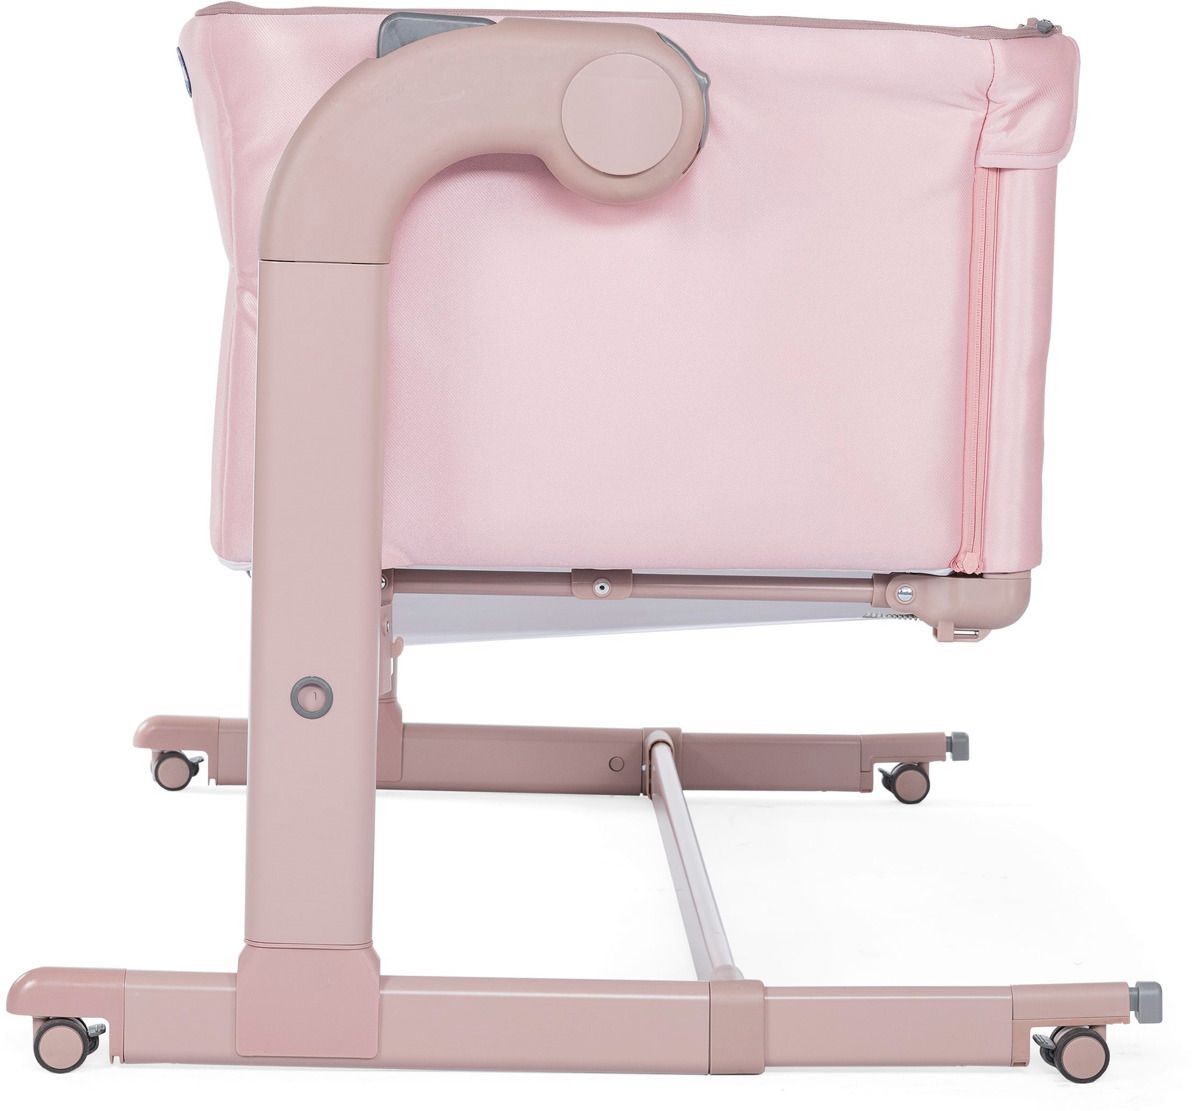   Chicco Next 2 Me Magic Candy Pink